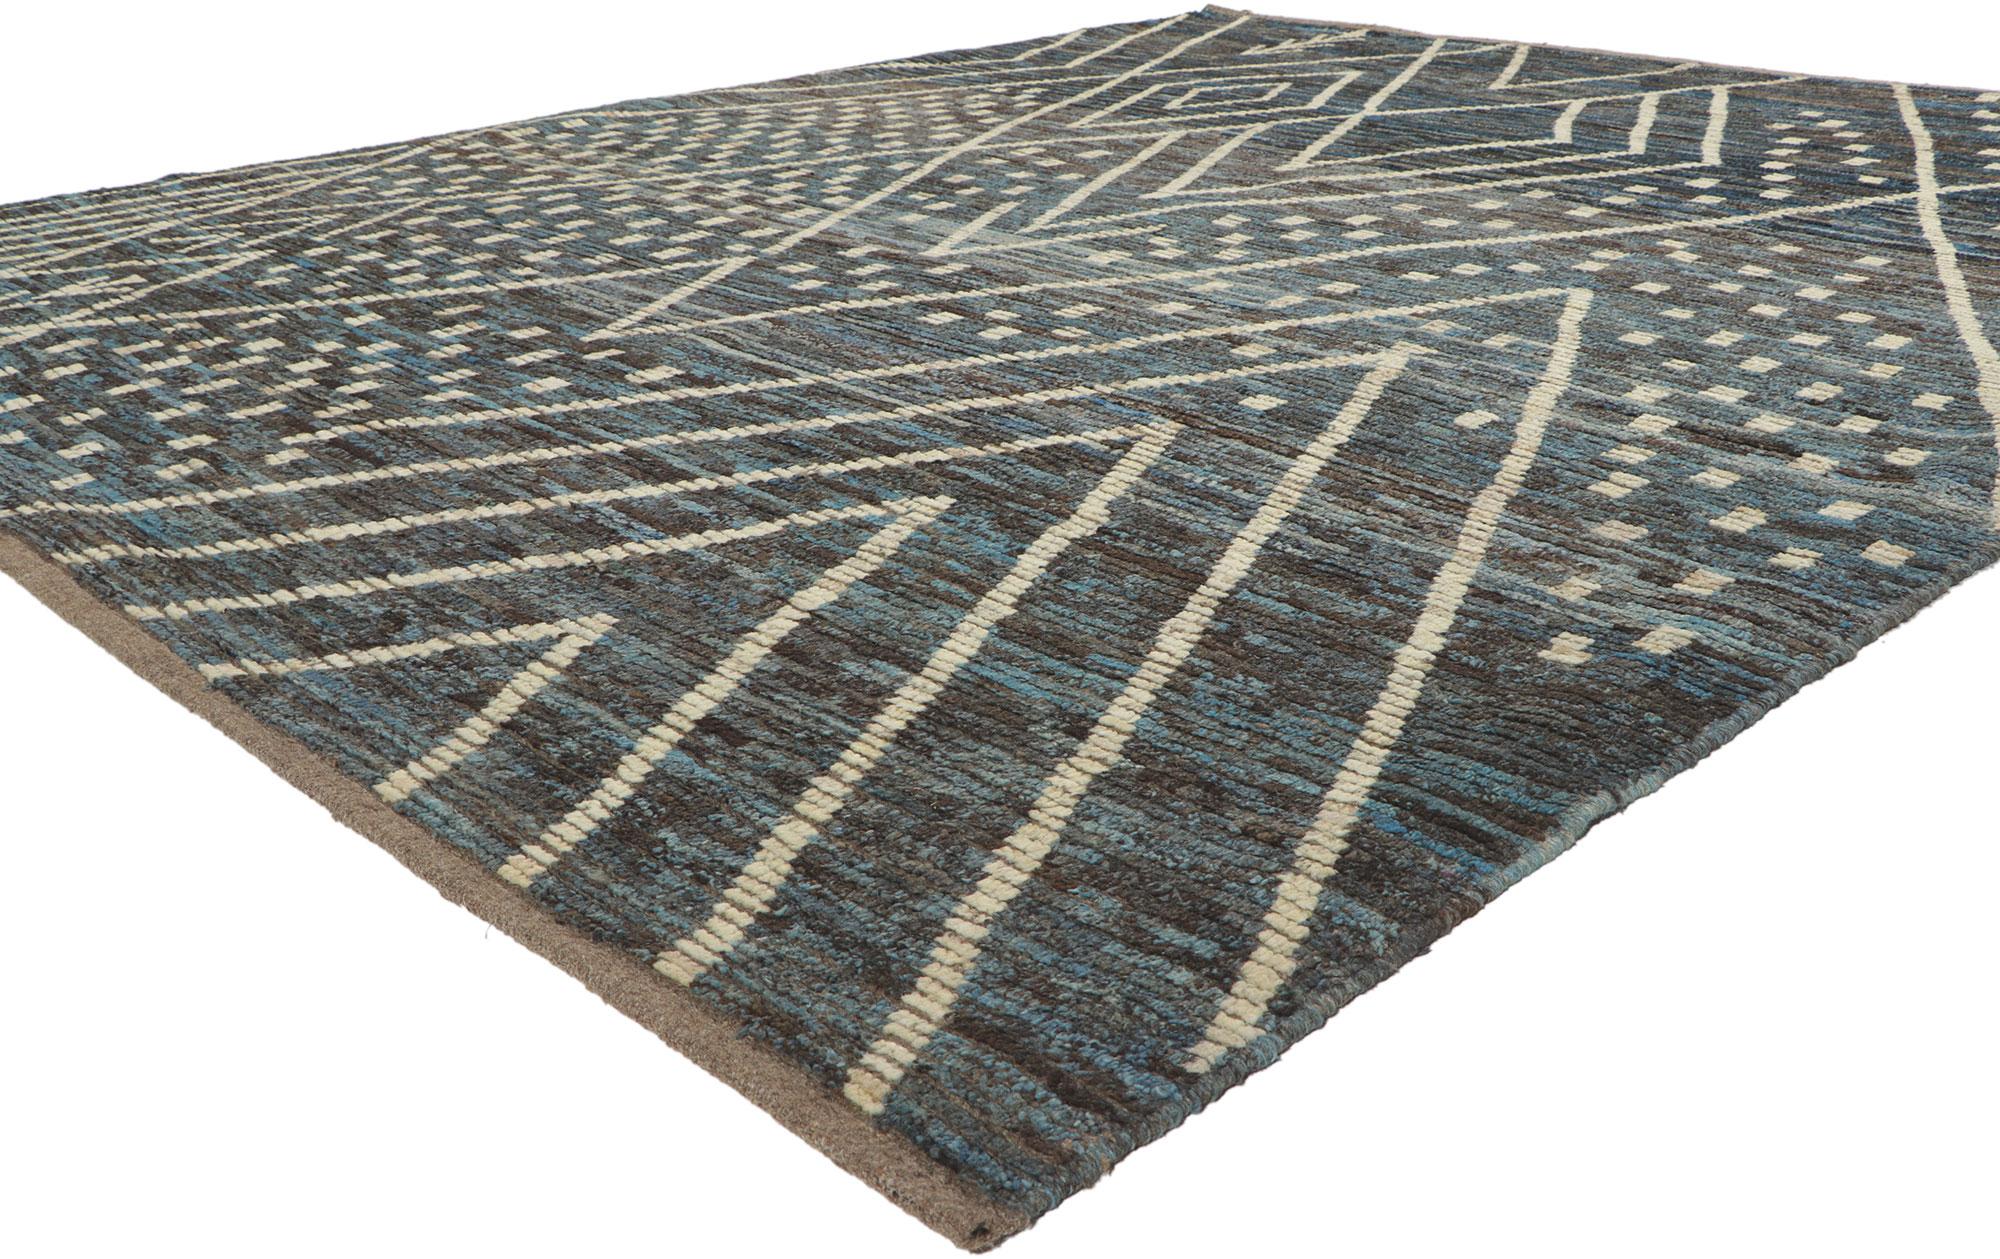 80796 New Contemporary Moroccan Rug with Modern Tribal Style, 08'02 x 10'02. Rendered in variegated shades of dark coffee, cerulean, brown, blue, taupe, glaucous, and beige with other accent colors.